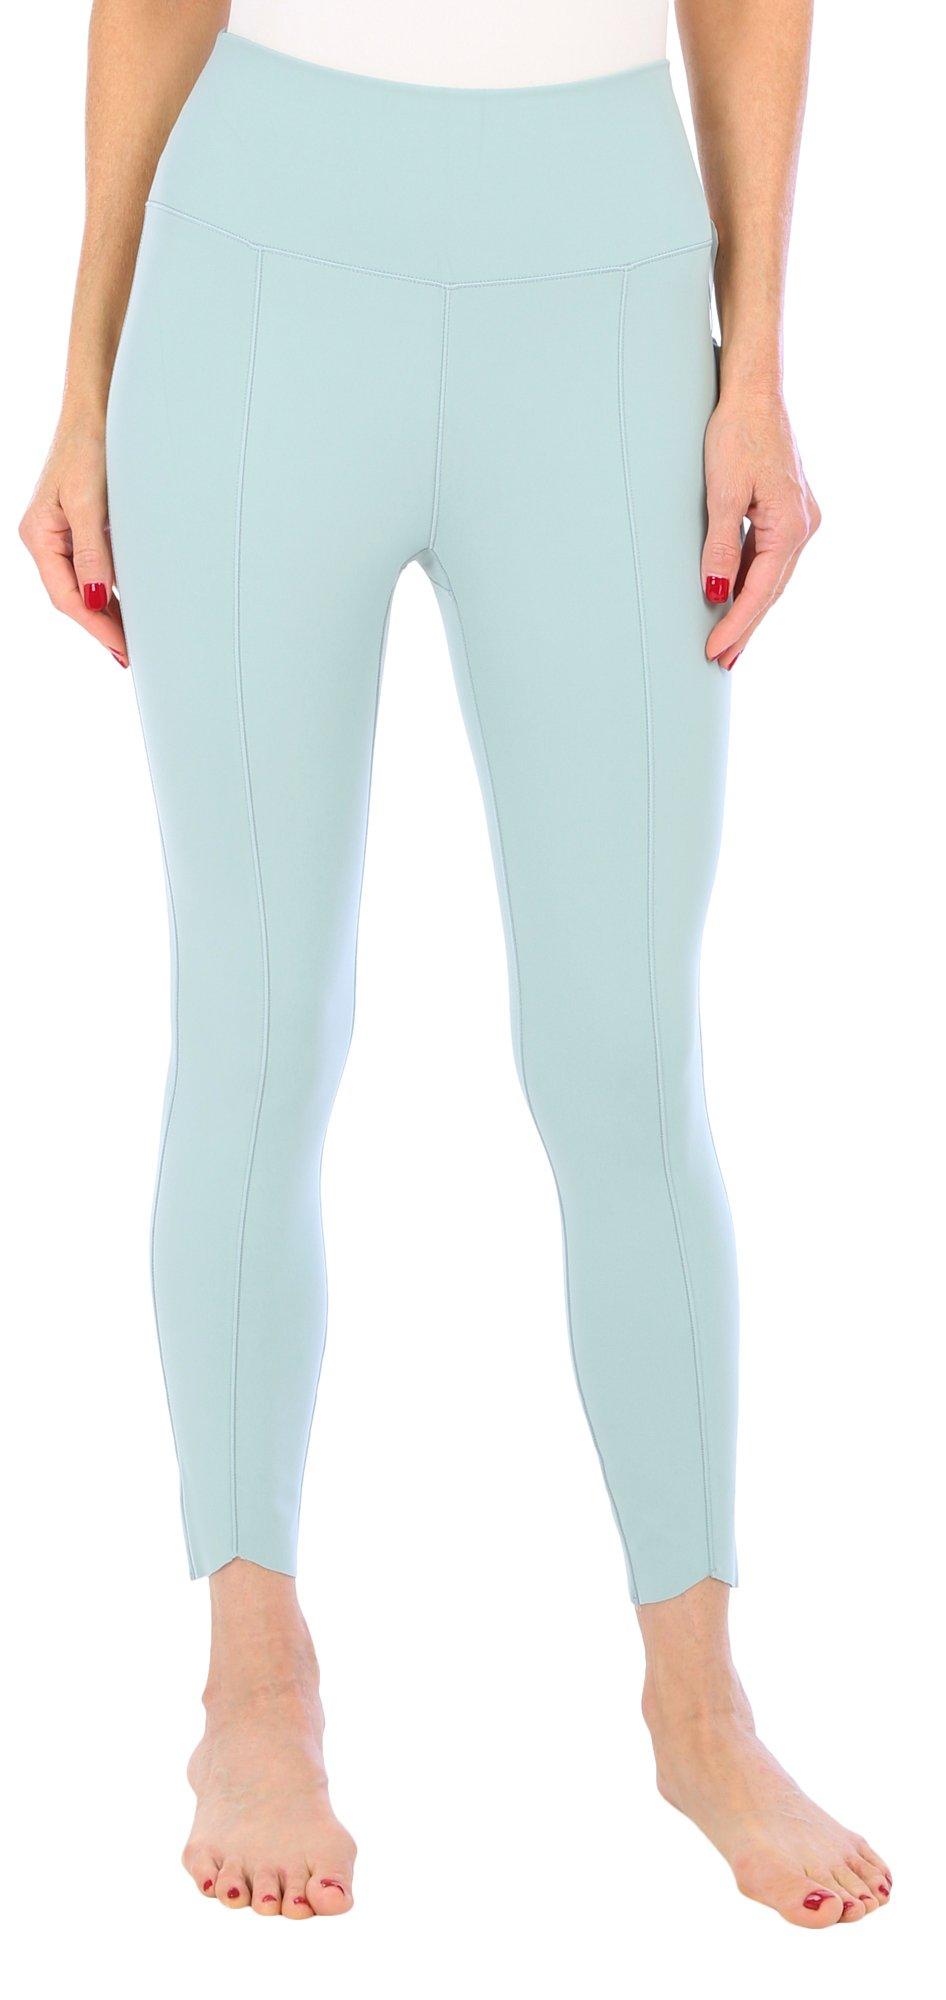 RBX Womens 26 in. Carbon Peached Leggings